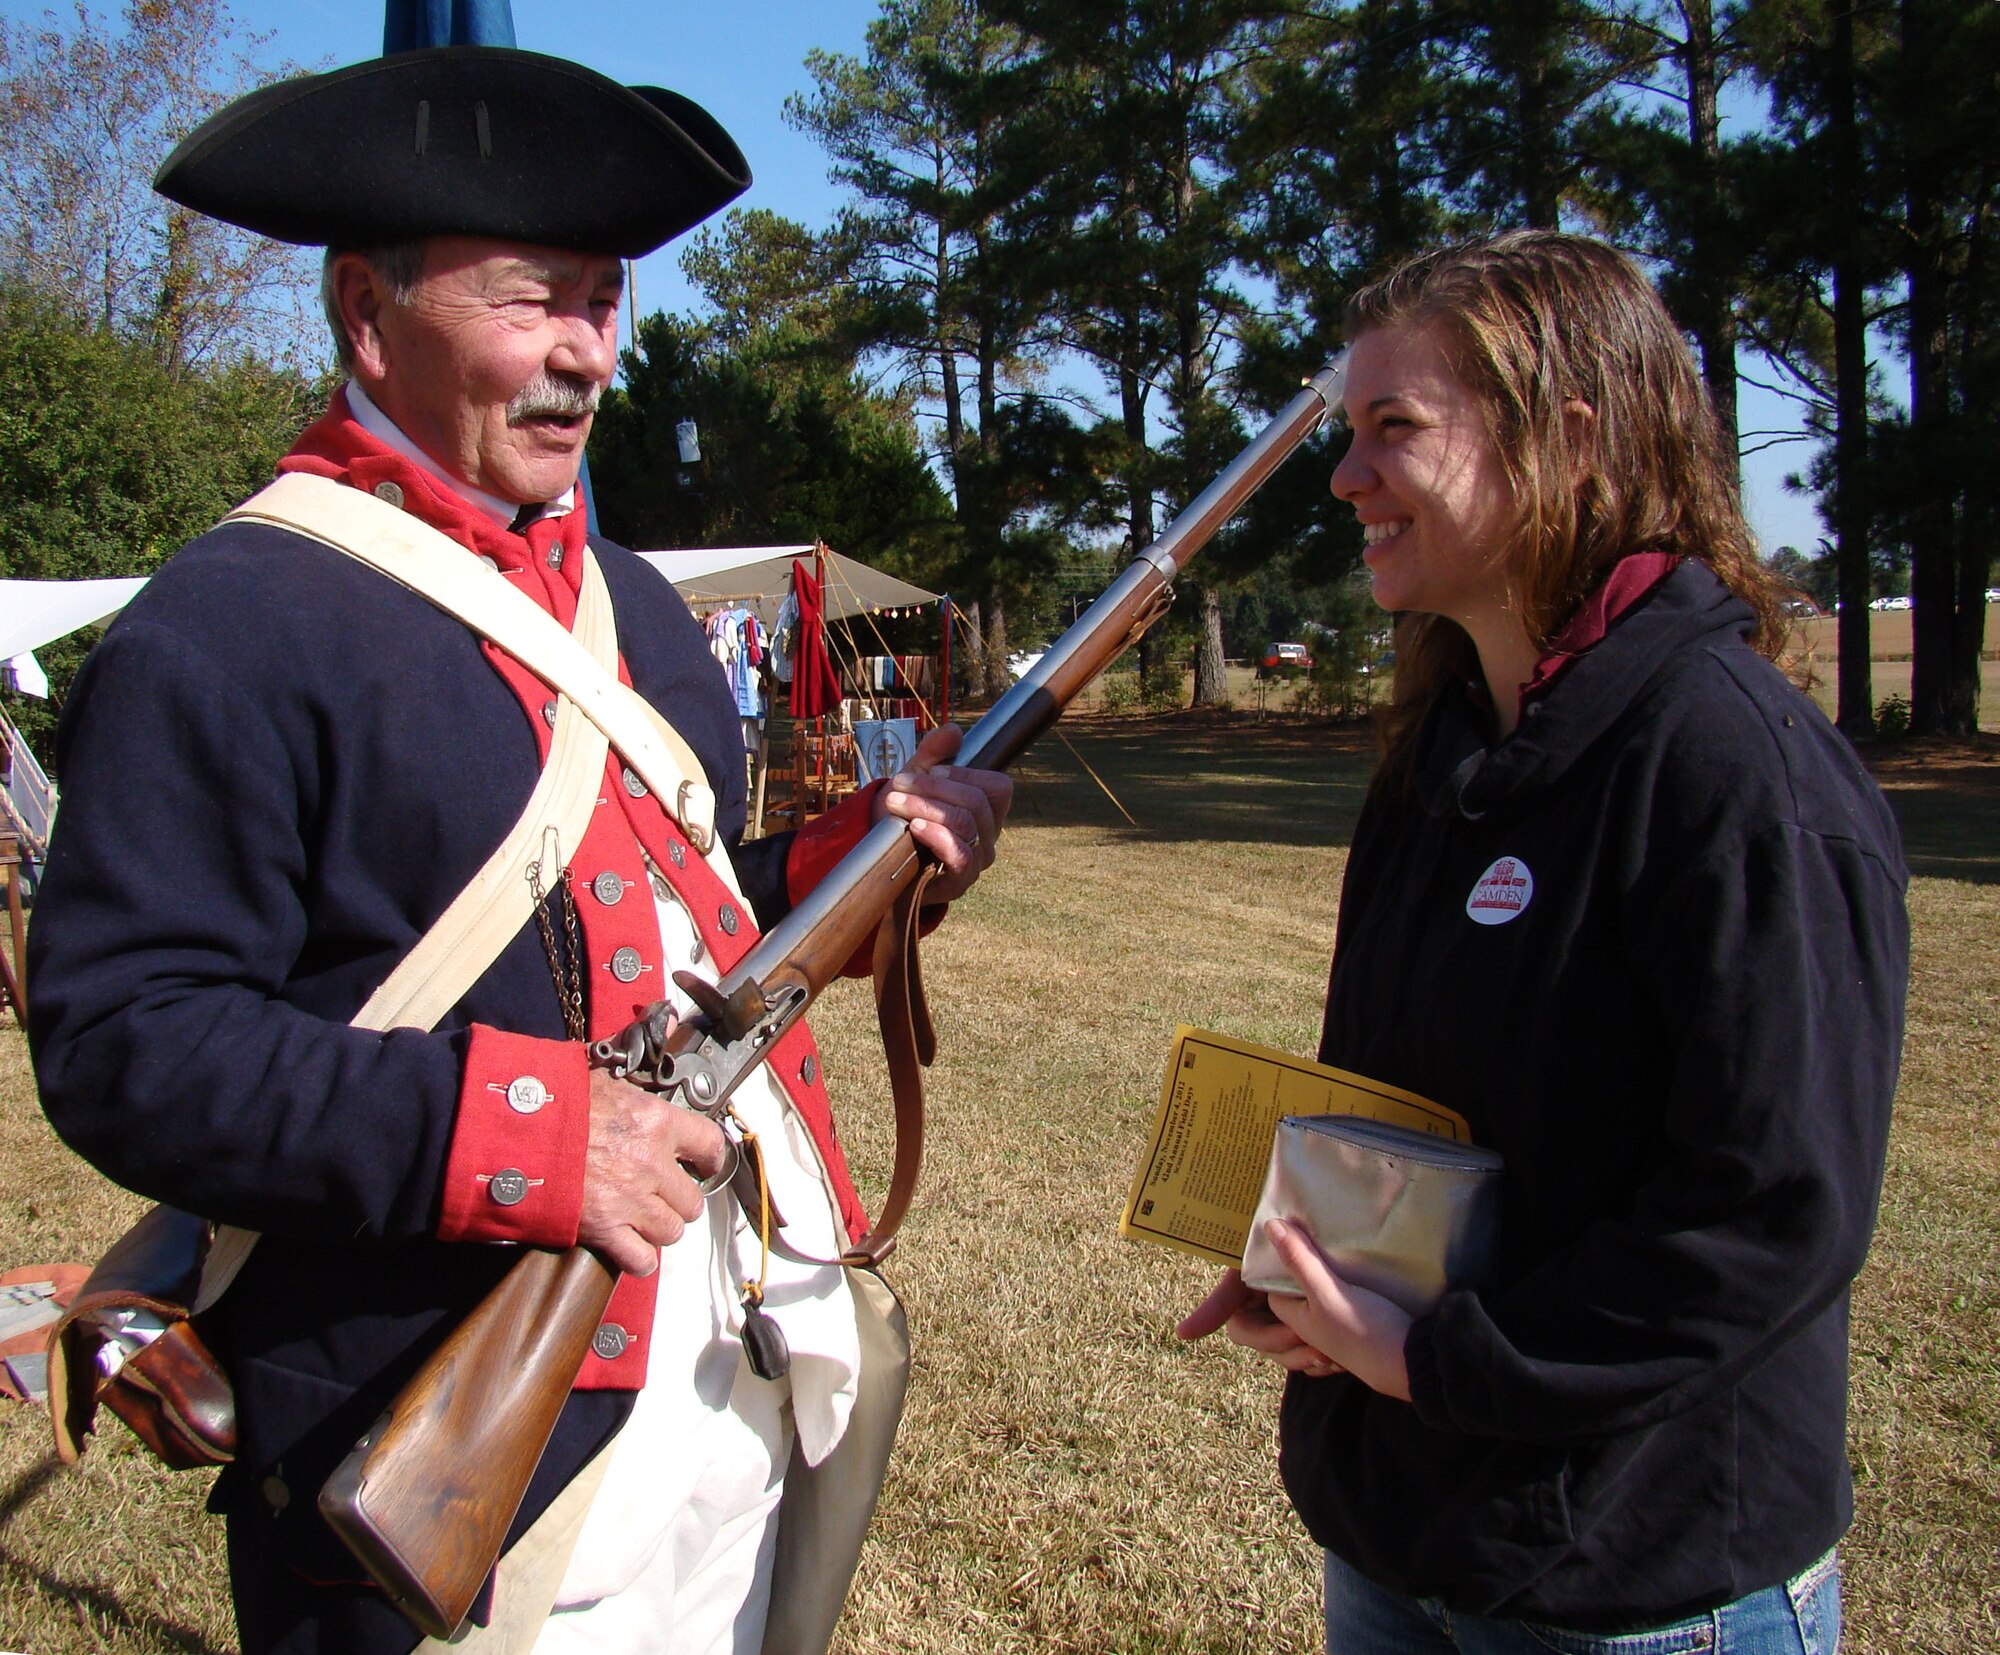 Buddy Bell, who portrays a rebel soldier of the American Revolution, explains his antique rifle to Airman Jodi Lange, 20th Medical Group pharmacy technician, at the Battle of Camden re-enactment Nov. 3, 2012, Camden, S.C. More than 200 actors, including many military veterans, brought the battlefield back to life 232 years after the event. (U.S. Air Force photo by Rob Sexton/Released)